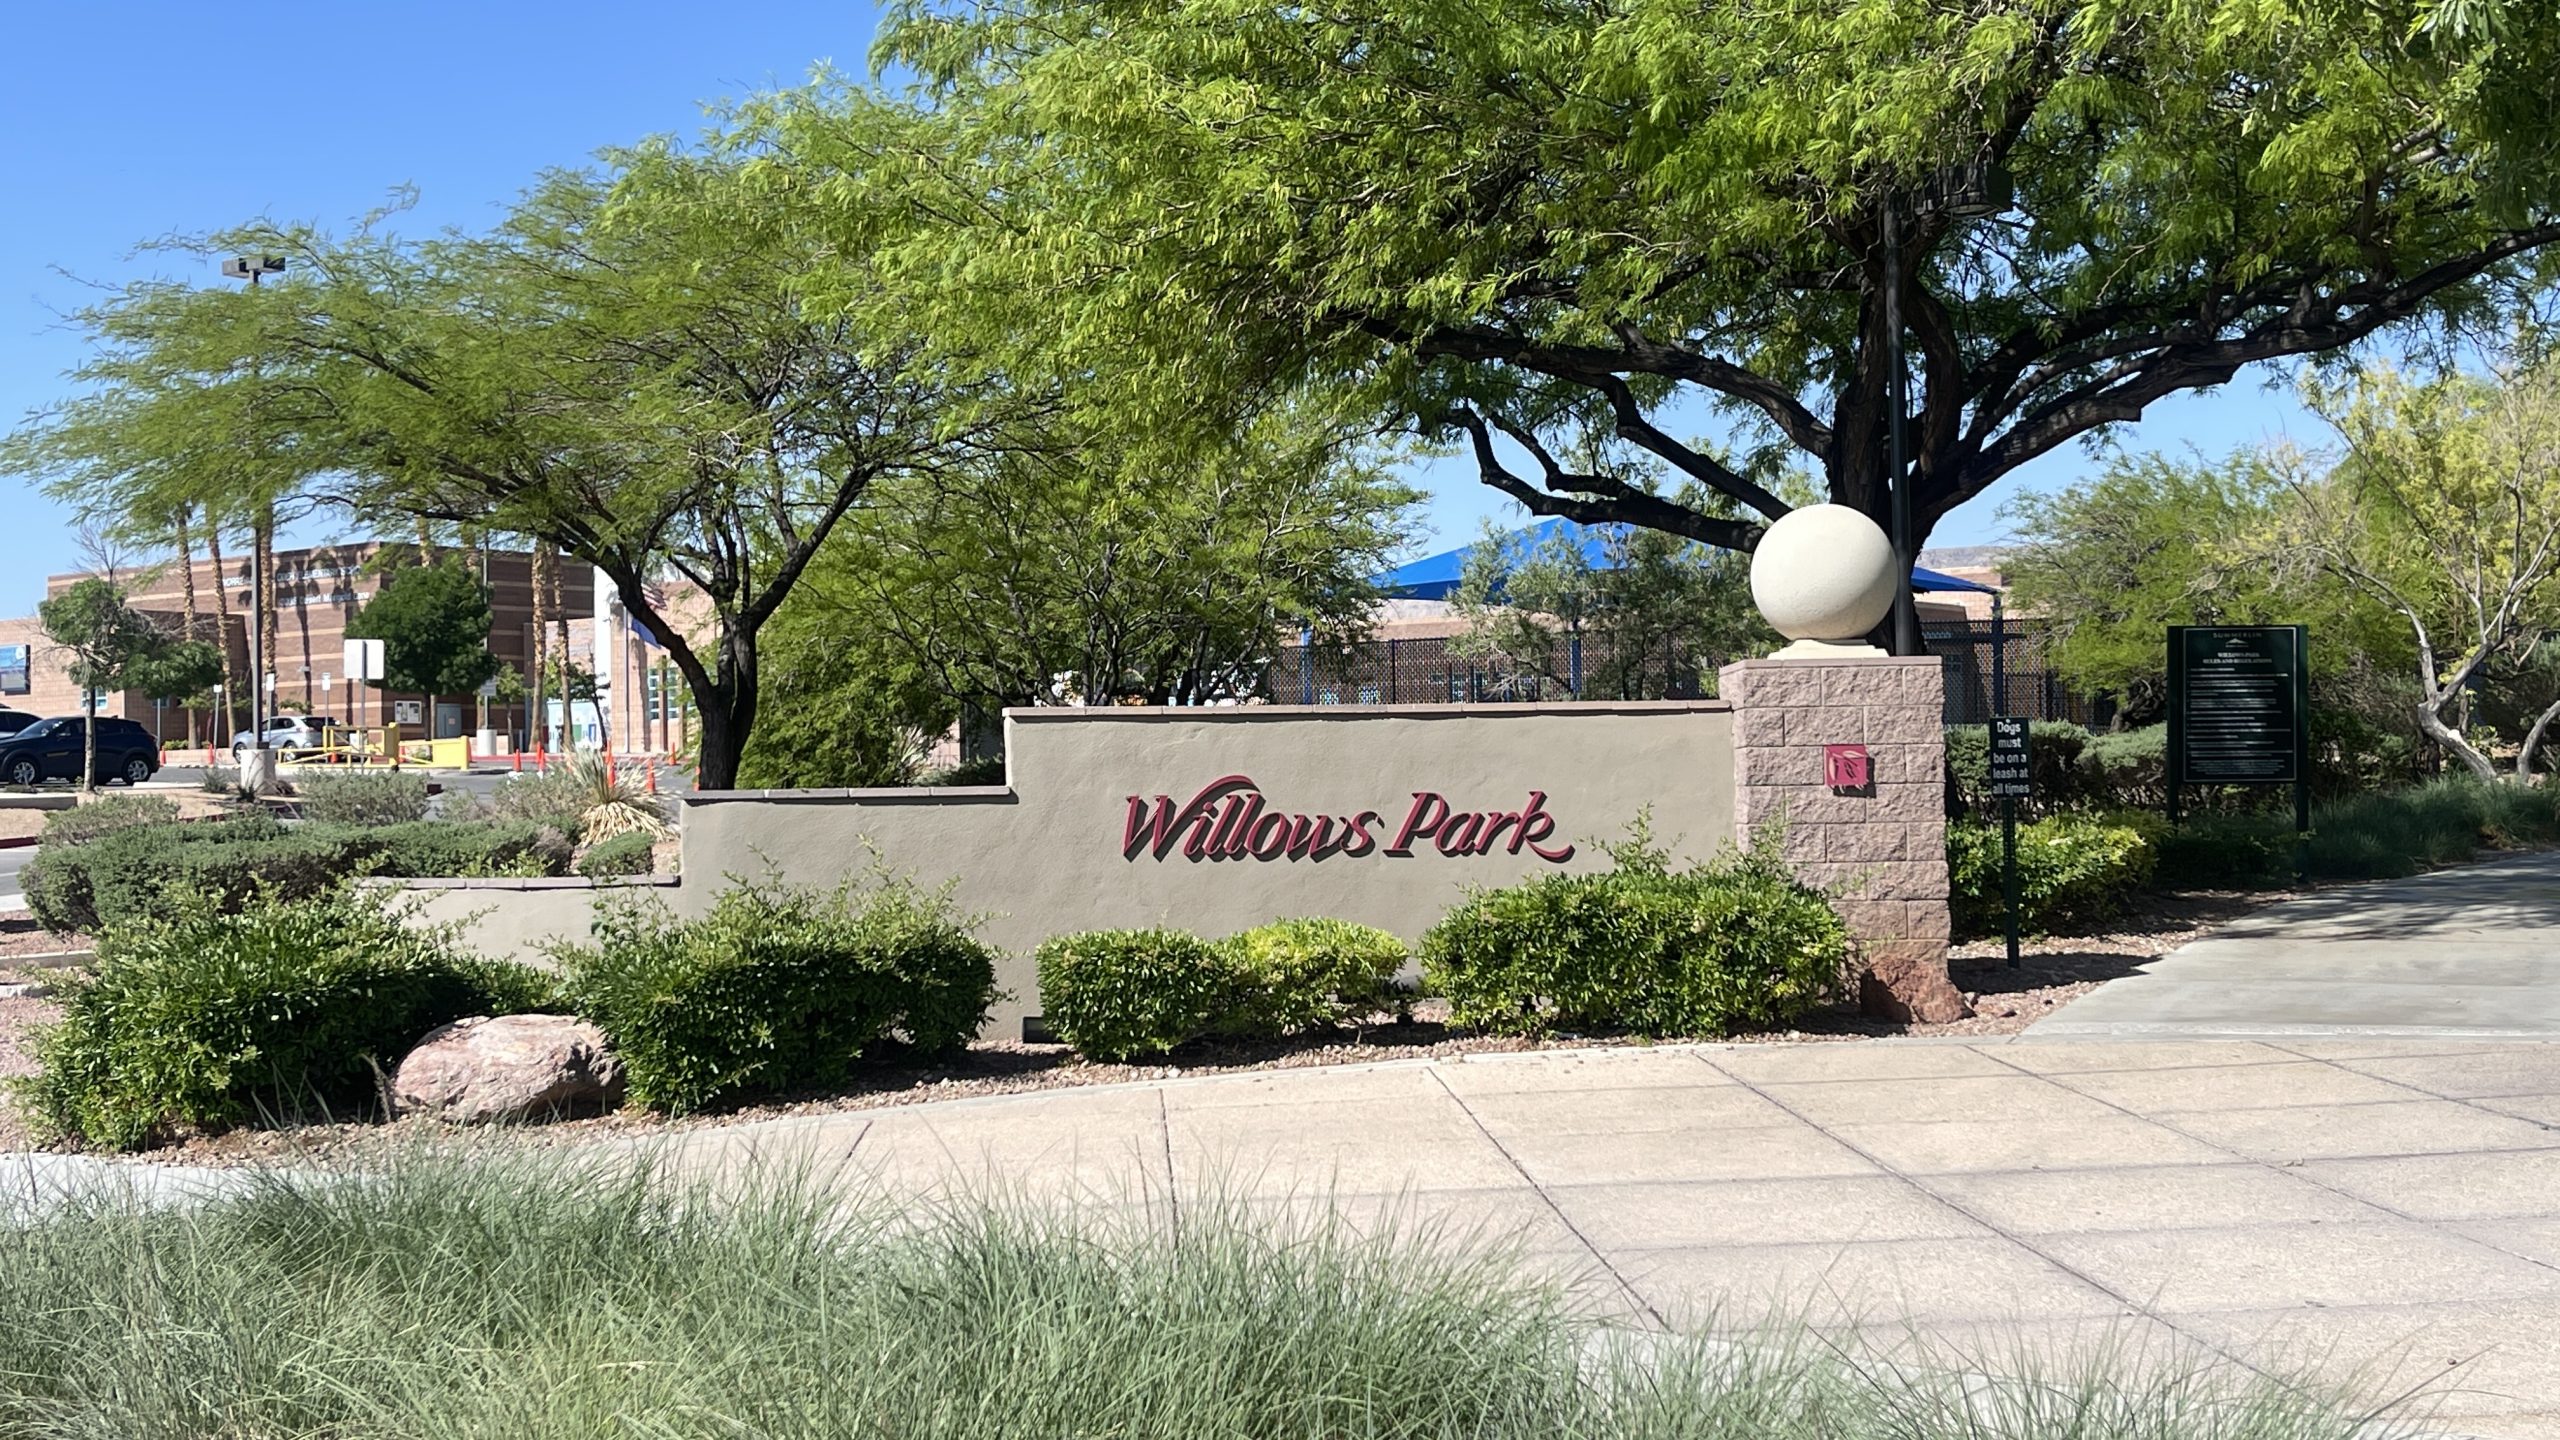 The Willows Park & Pool